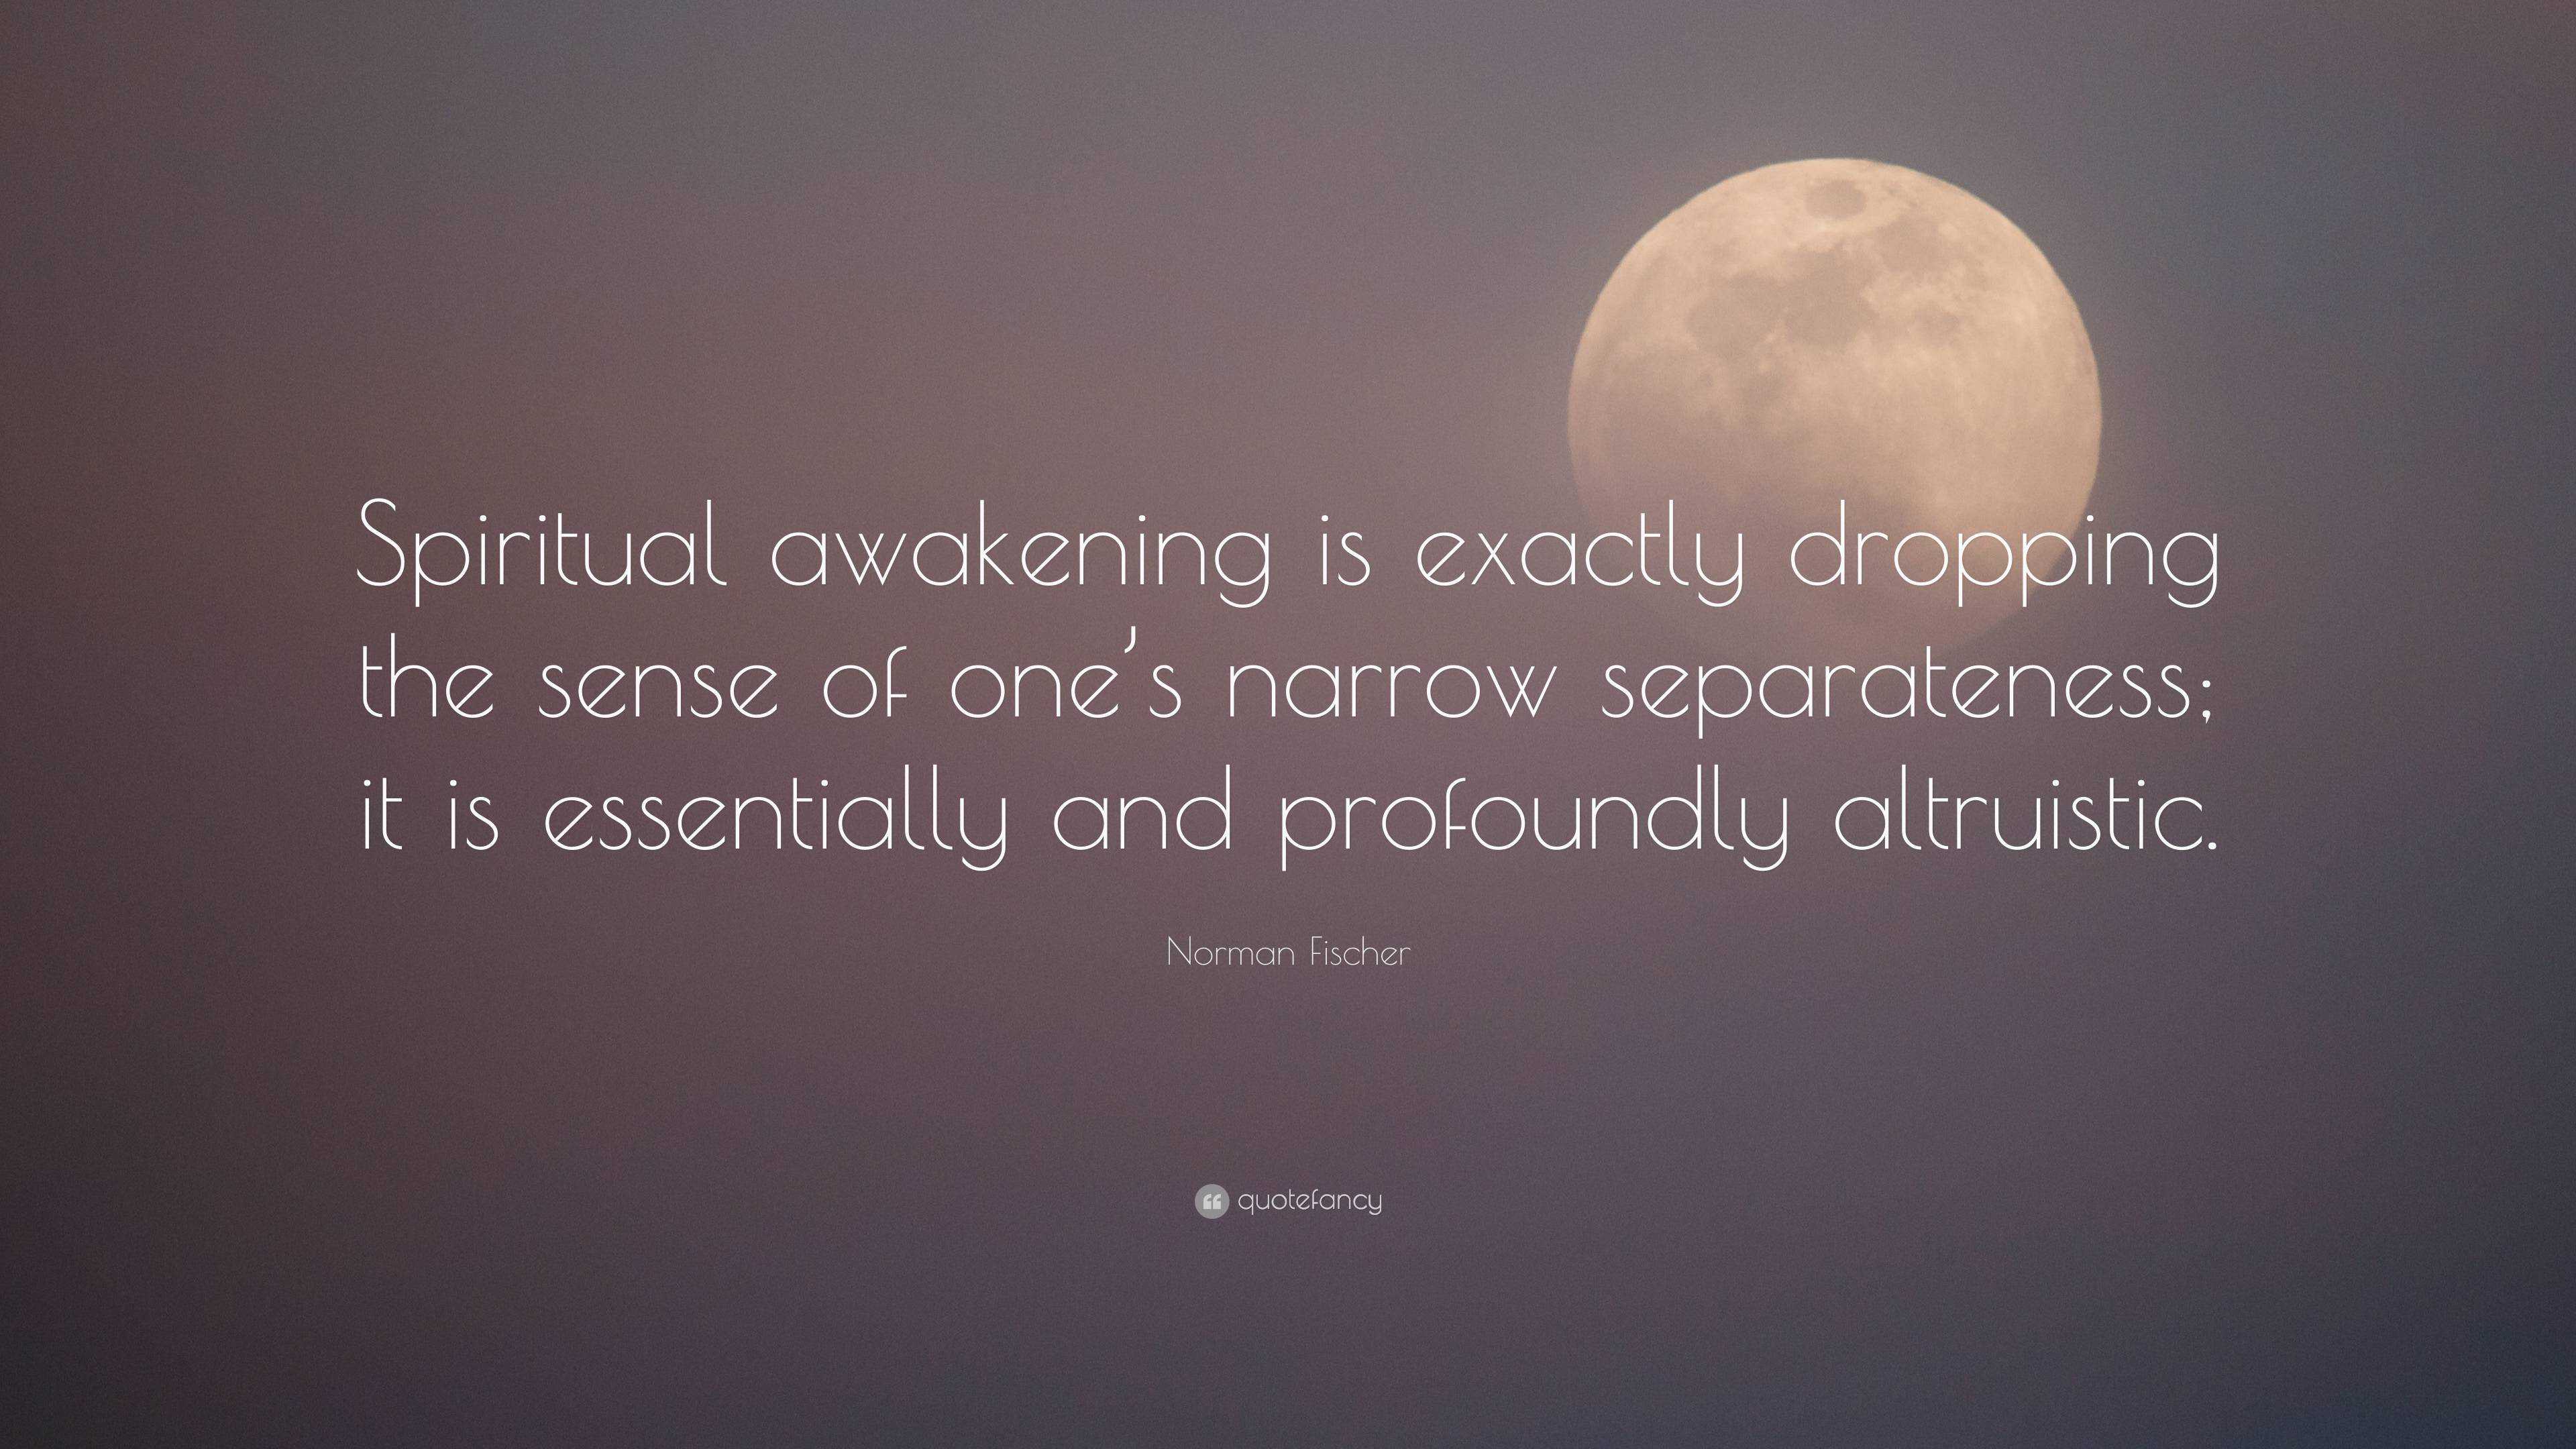 Norman Fischer Quote: “Spiritual awakening is exactly dropping the ...